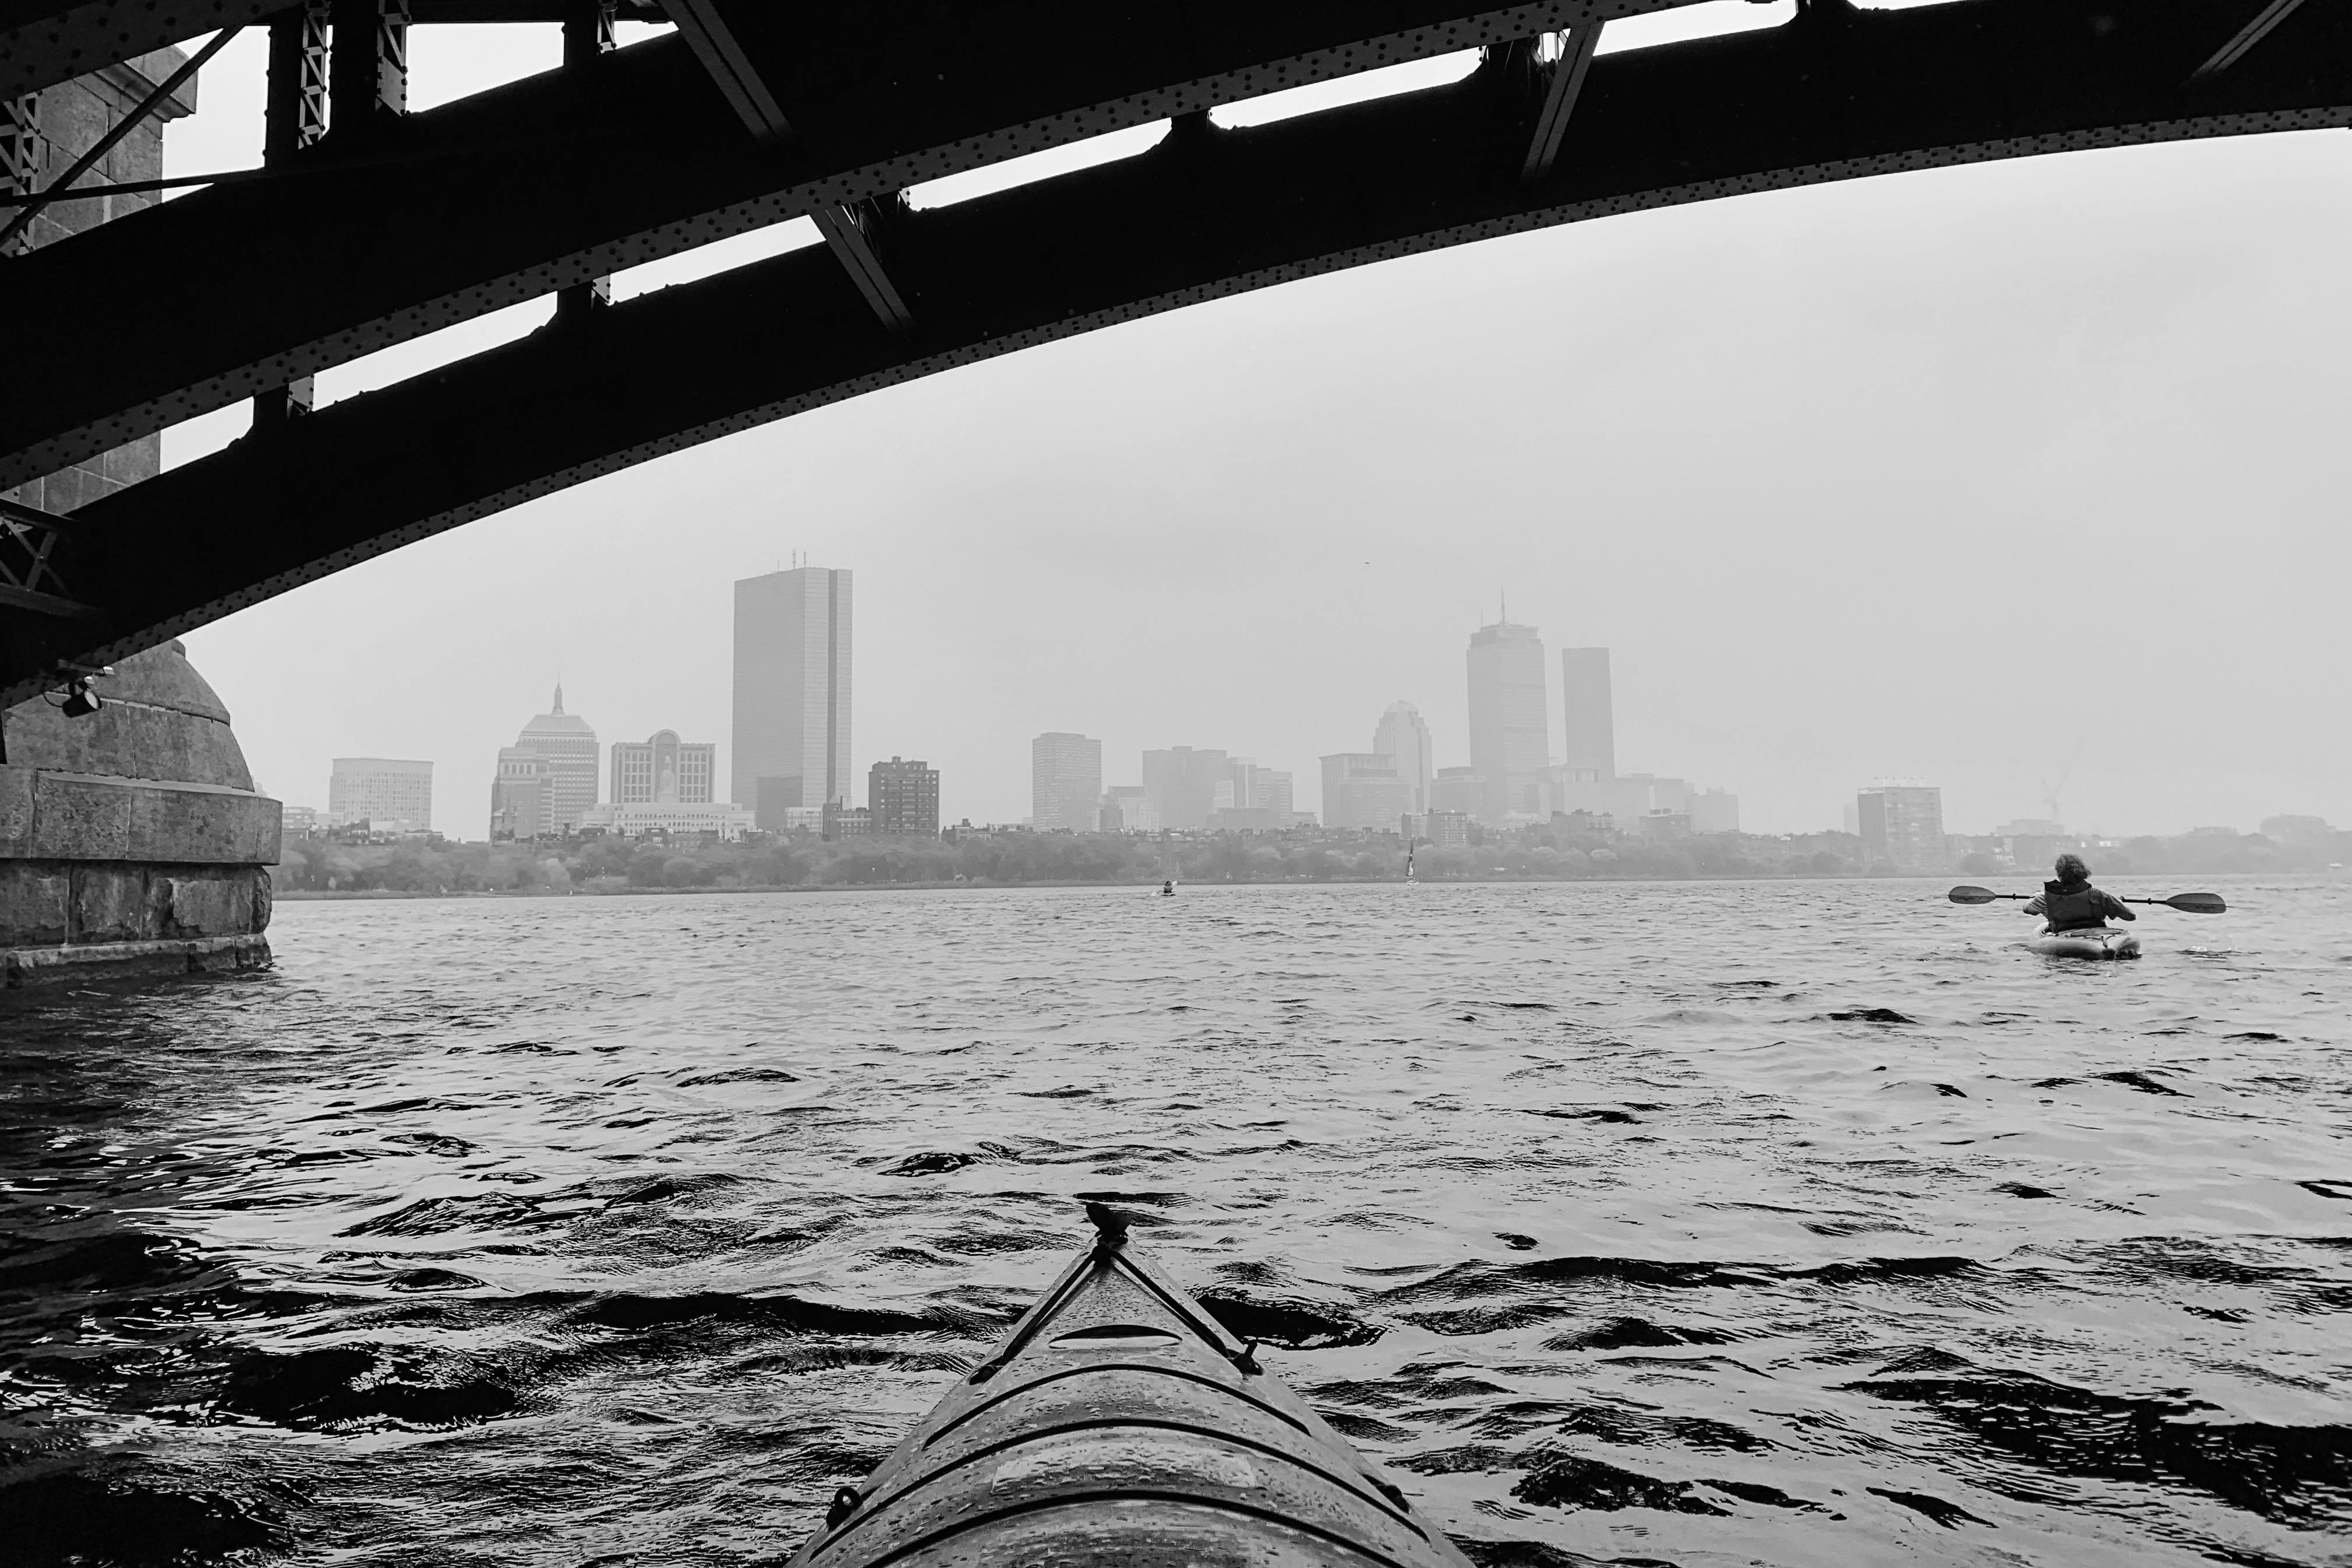 View of Boston skyline from kayak on the Charles River